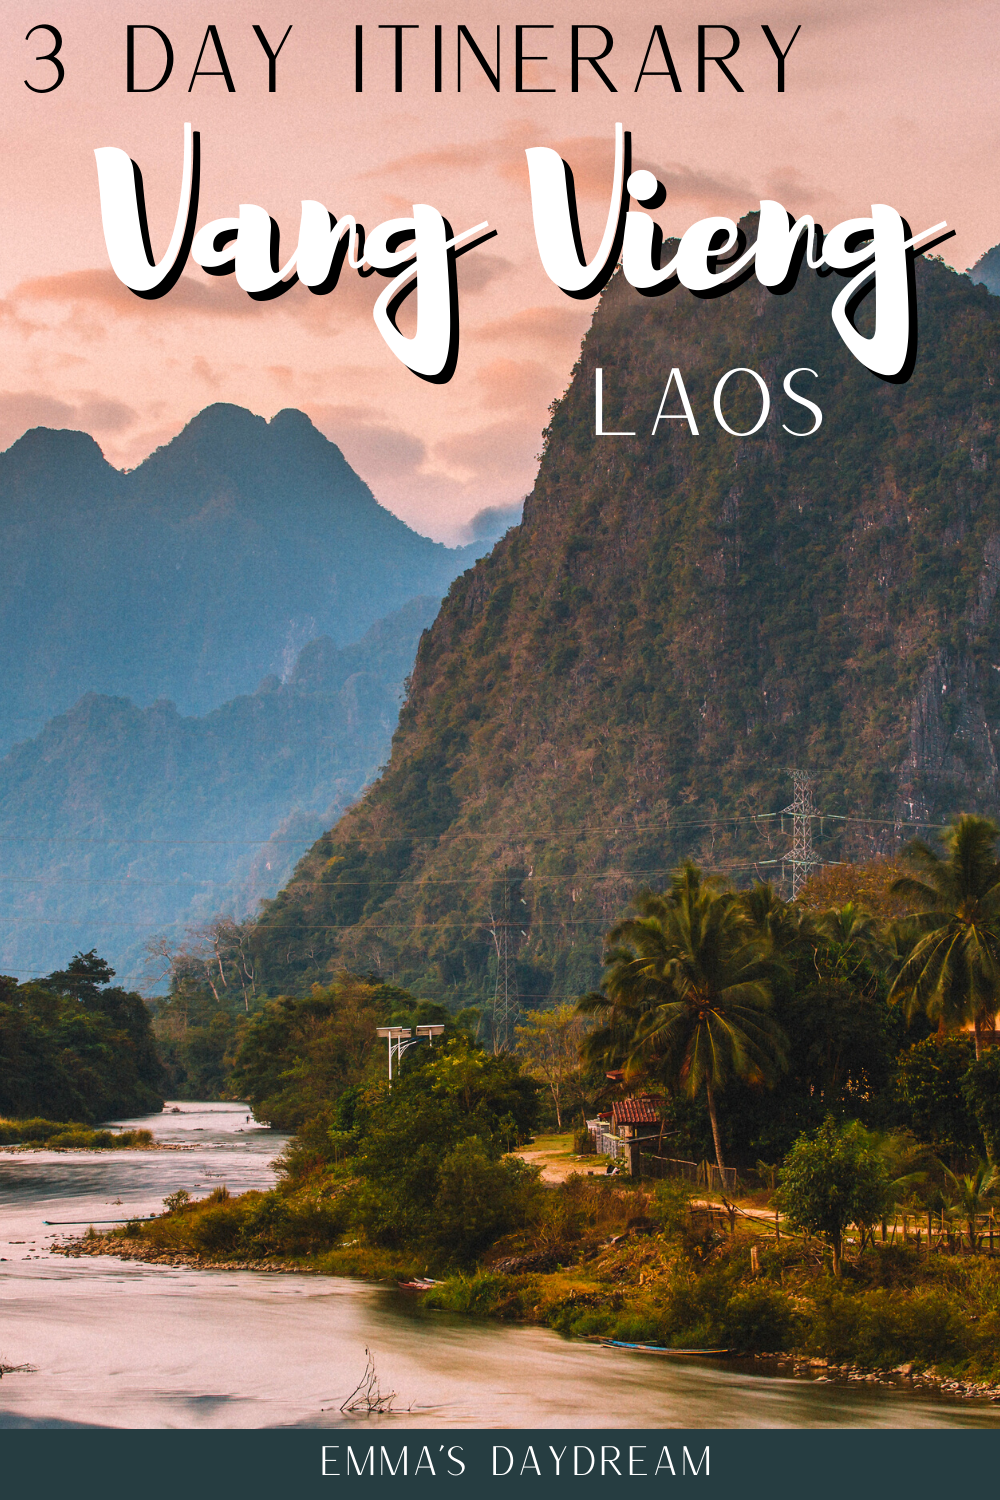 Things to do in Vang Vieng: Blue Lagoons, Nam Xay Viewpoint